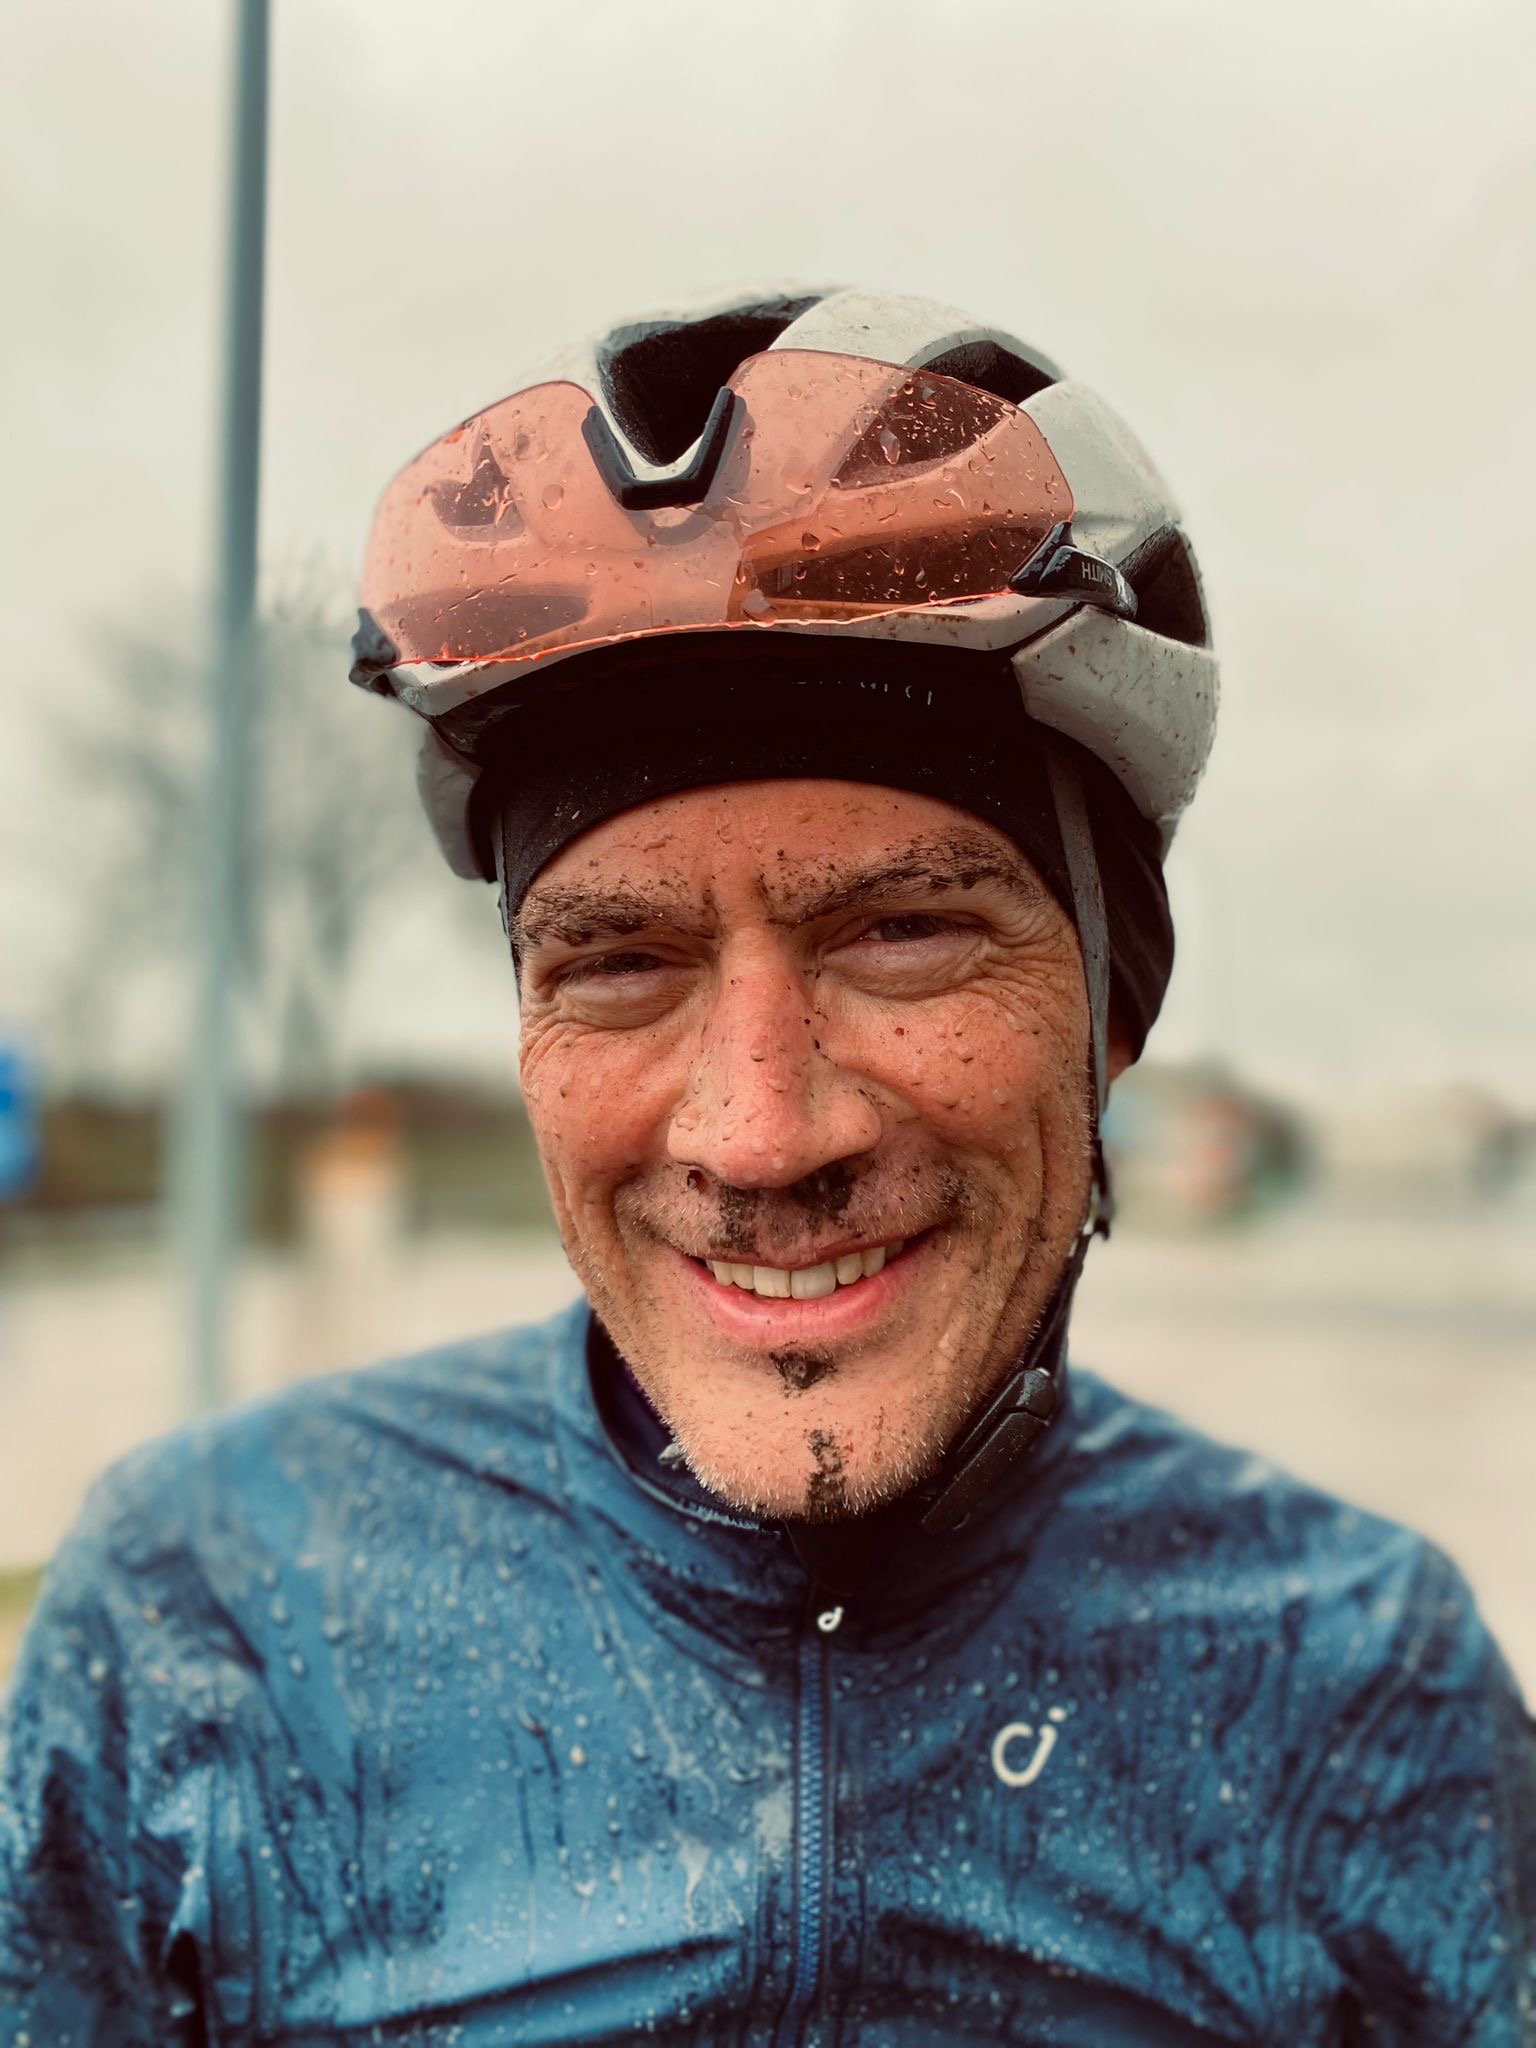 A portrait of Todd Markelz, face spackled with mud and dirt from riding in the rain